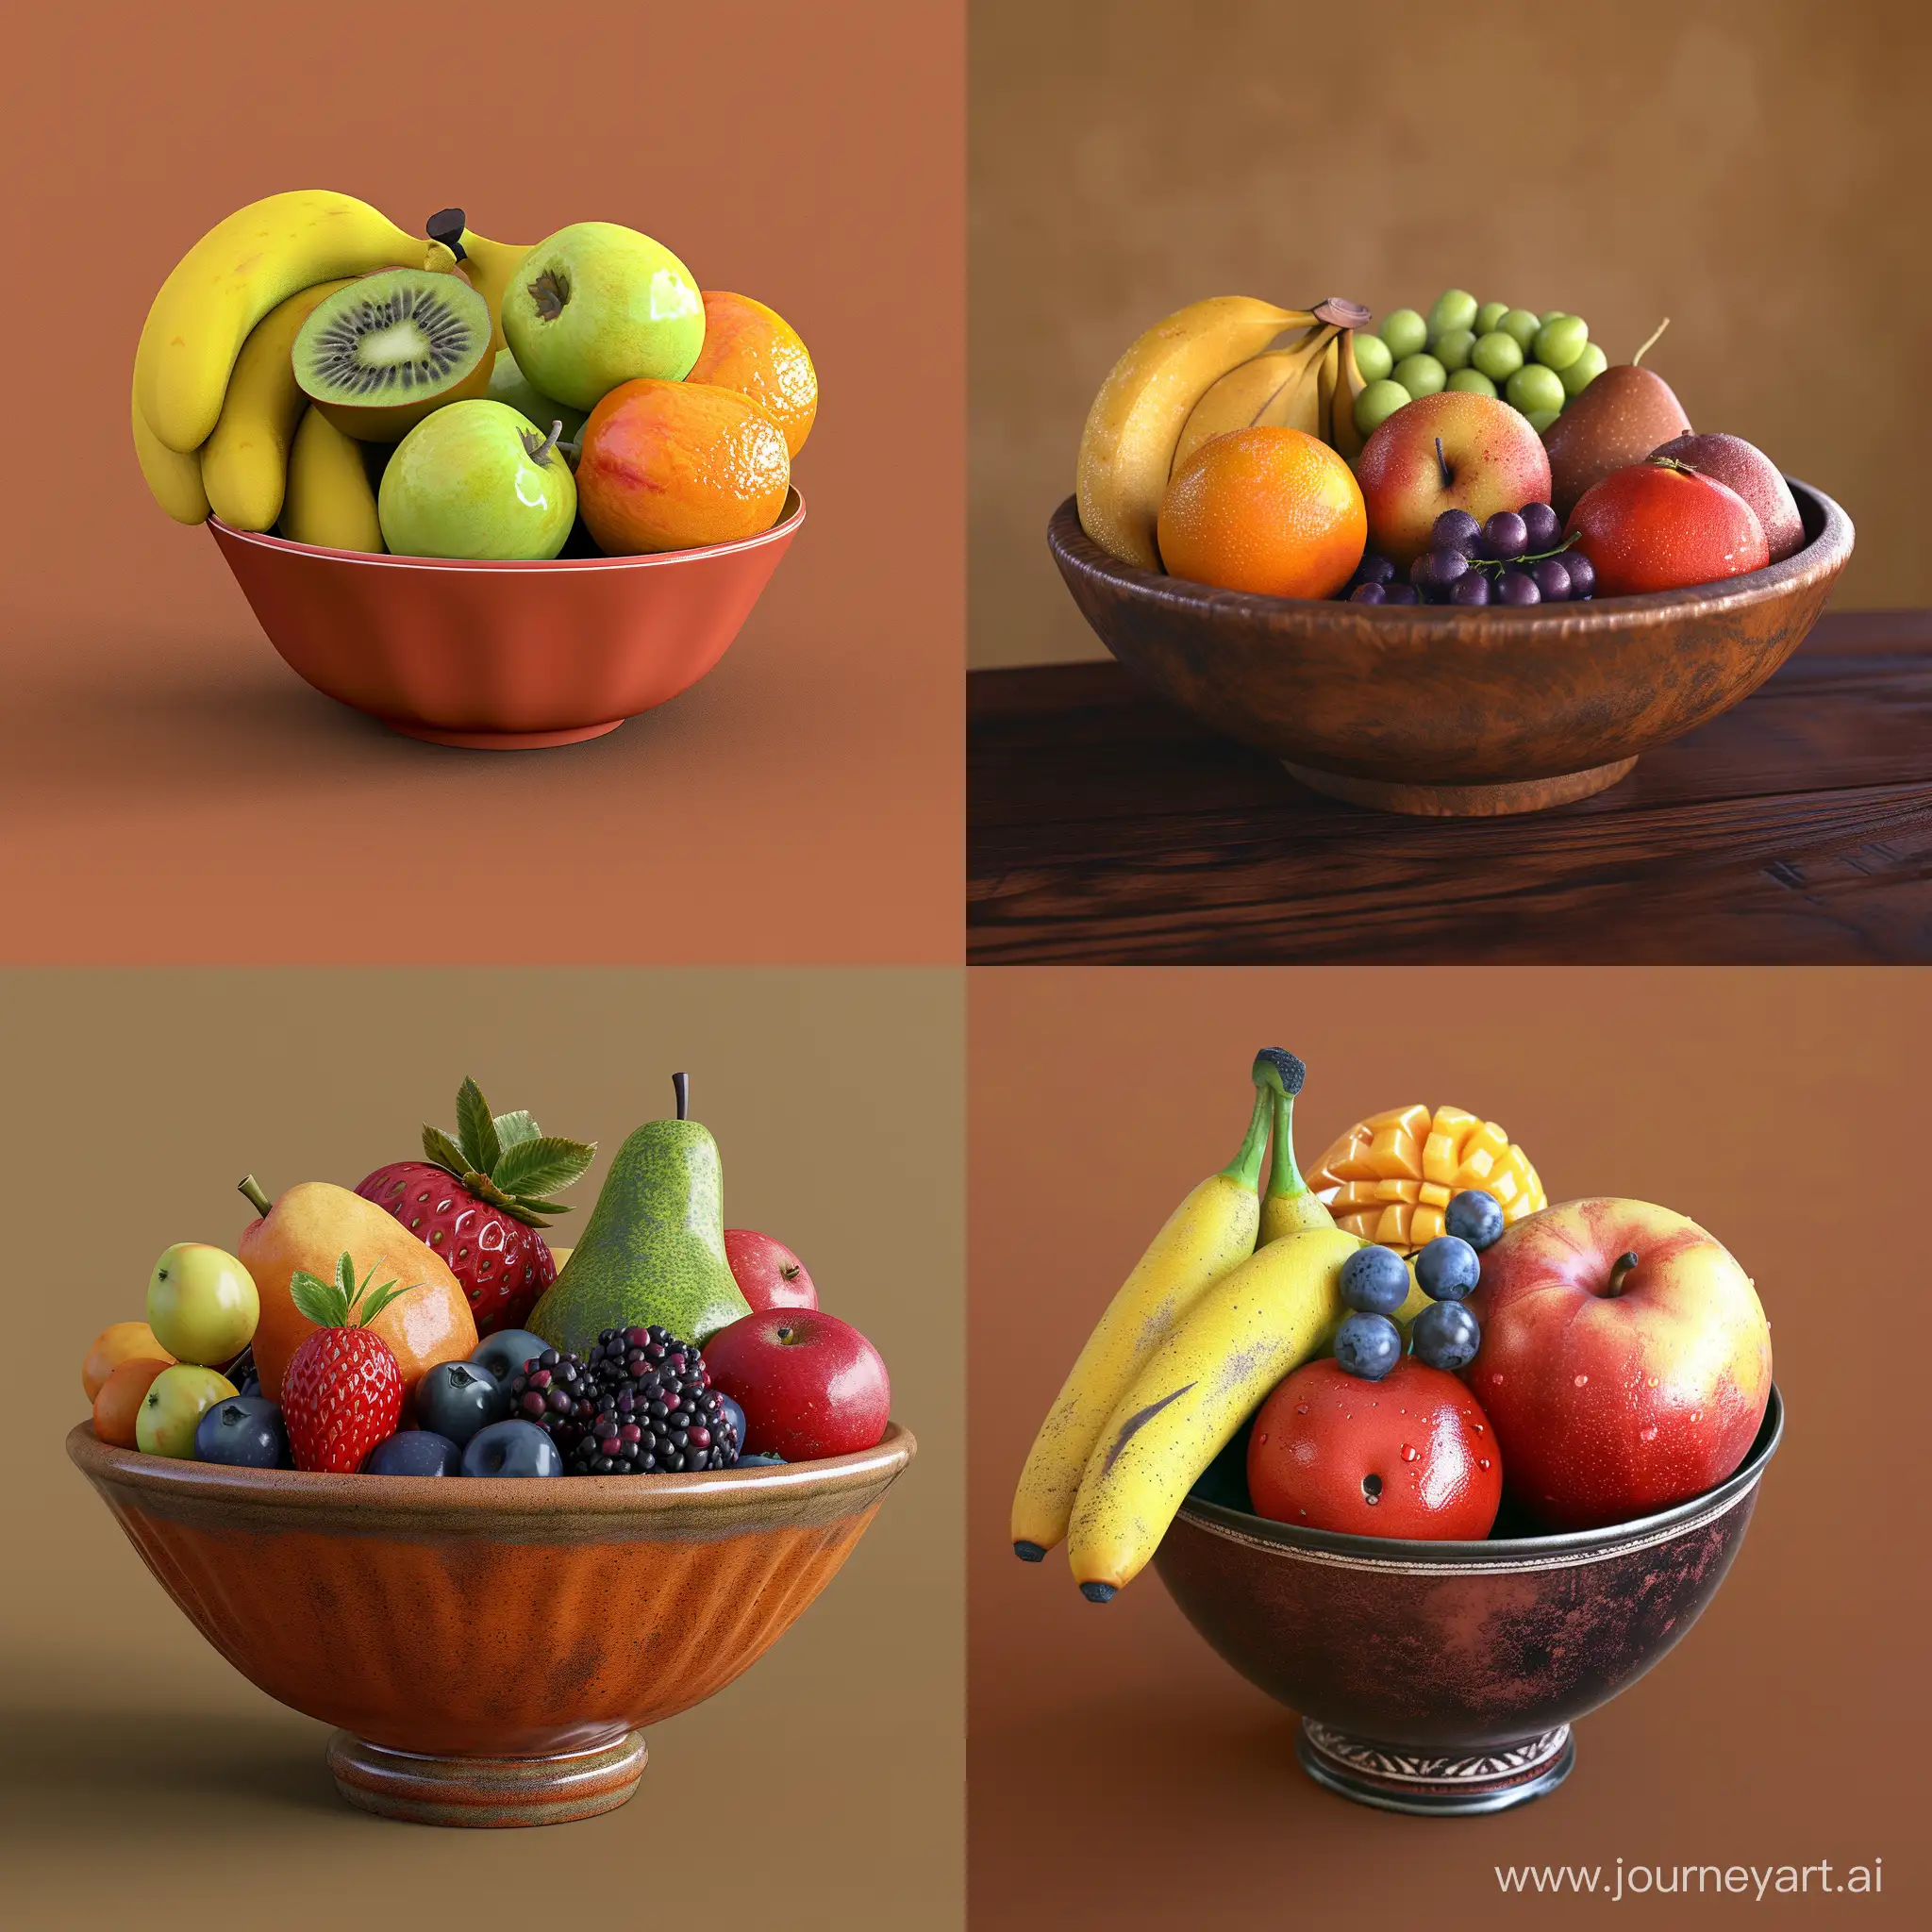 Rustic-3D-Rendering-Vibrant-Fruit-Bowl-on-Earthy-Brown-Background